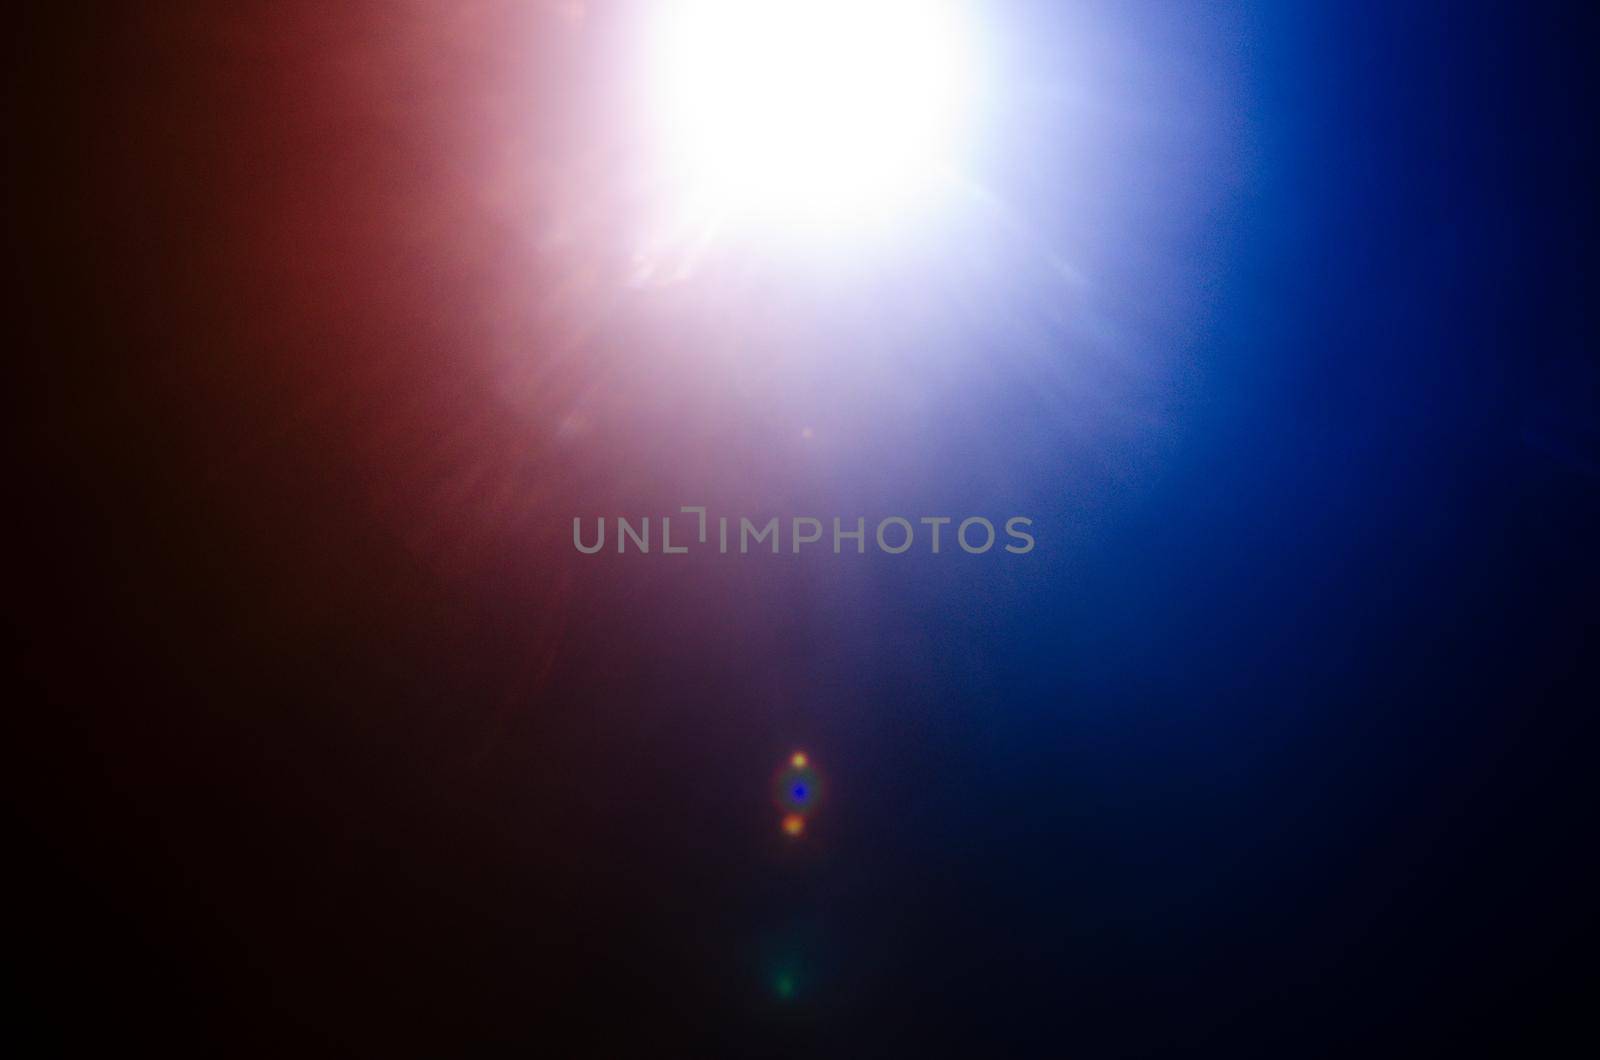 Abstract Natural Sun flare or Far star on the black background - image